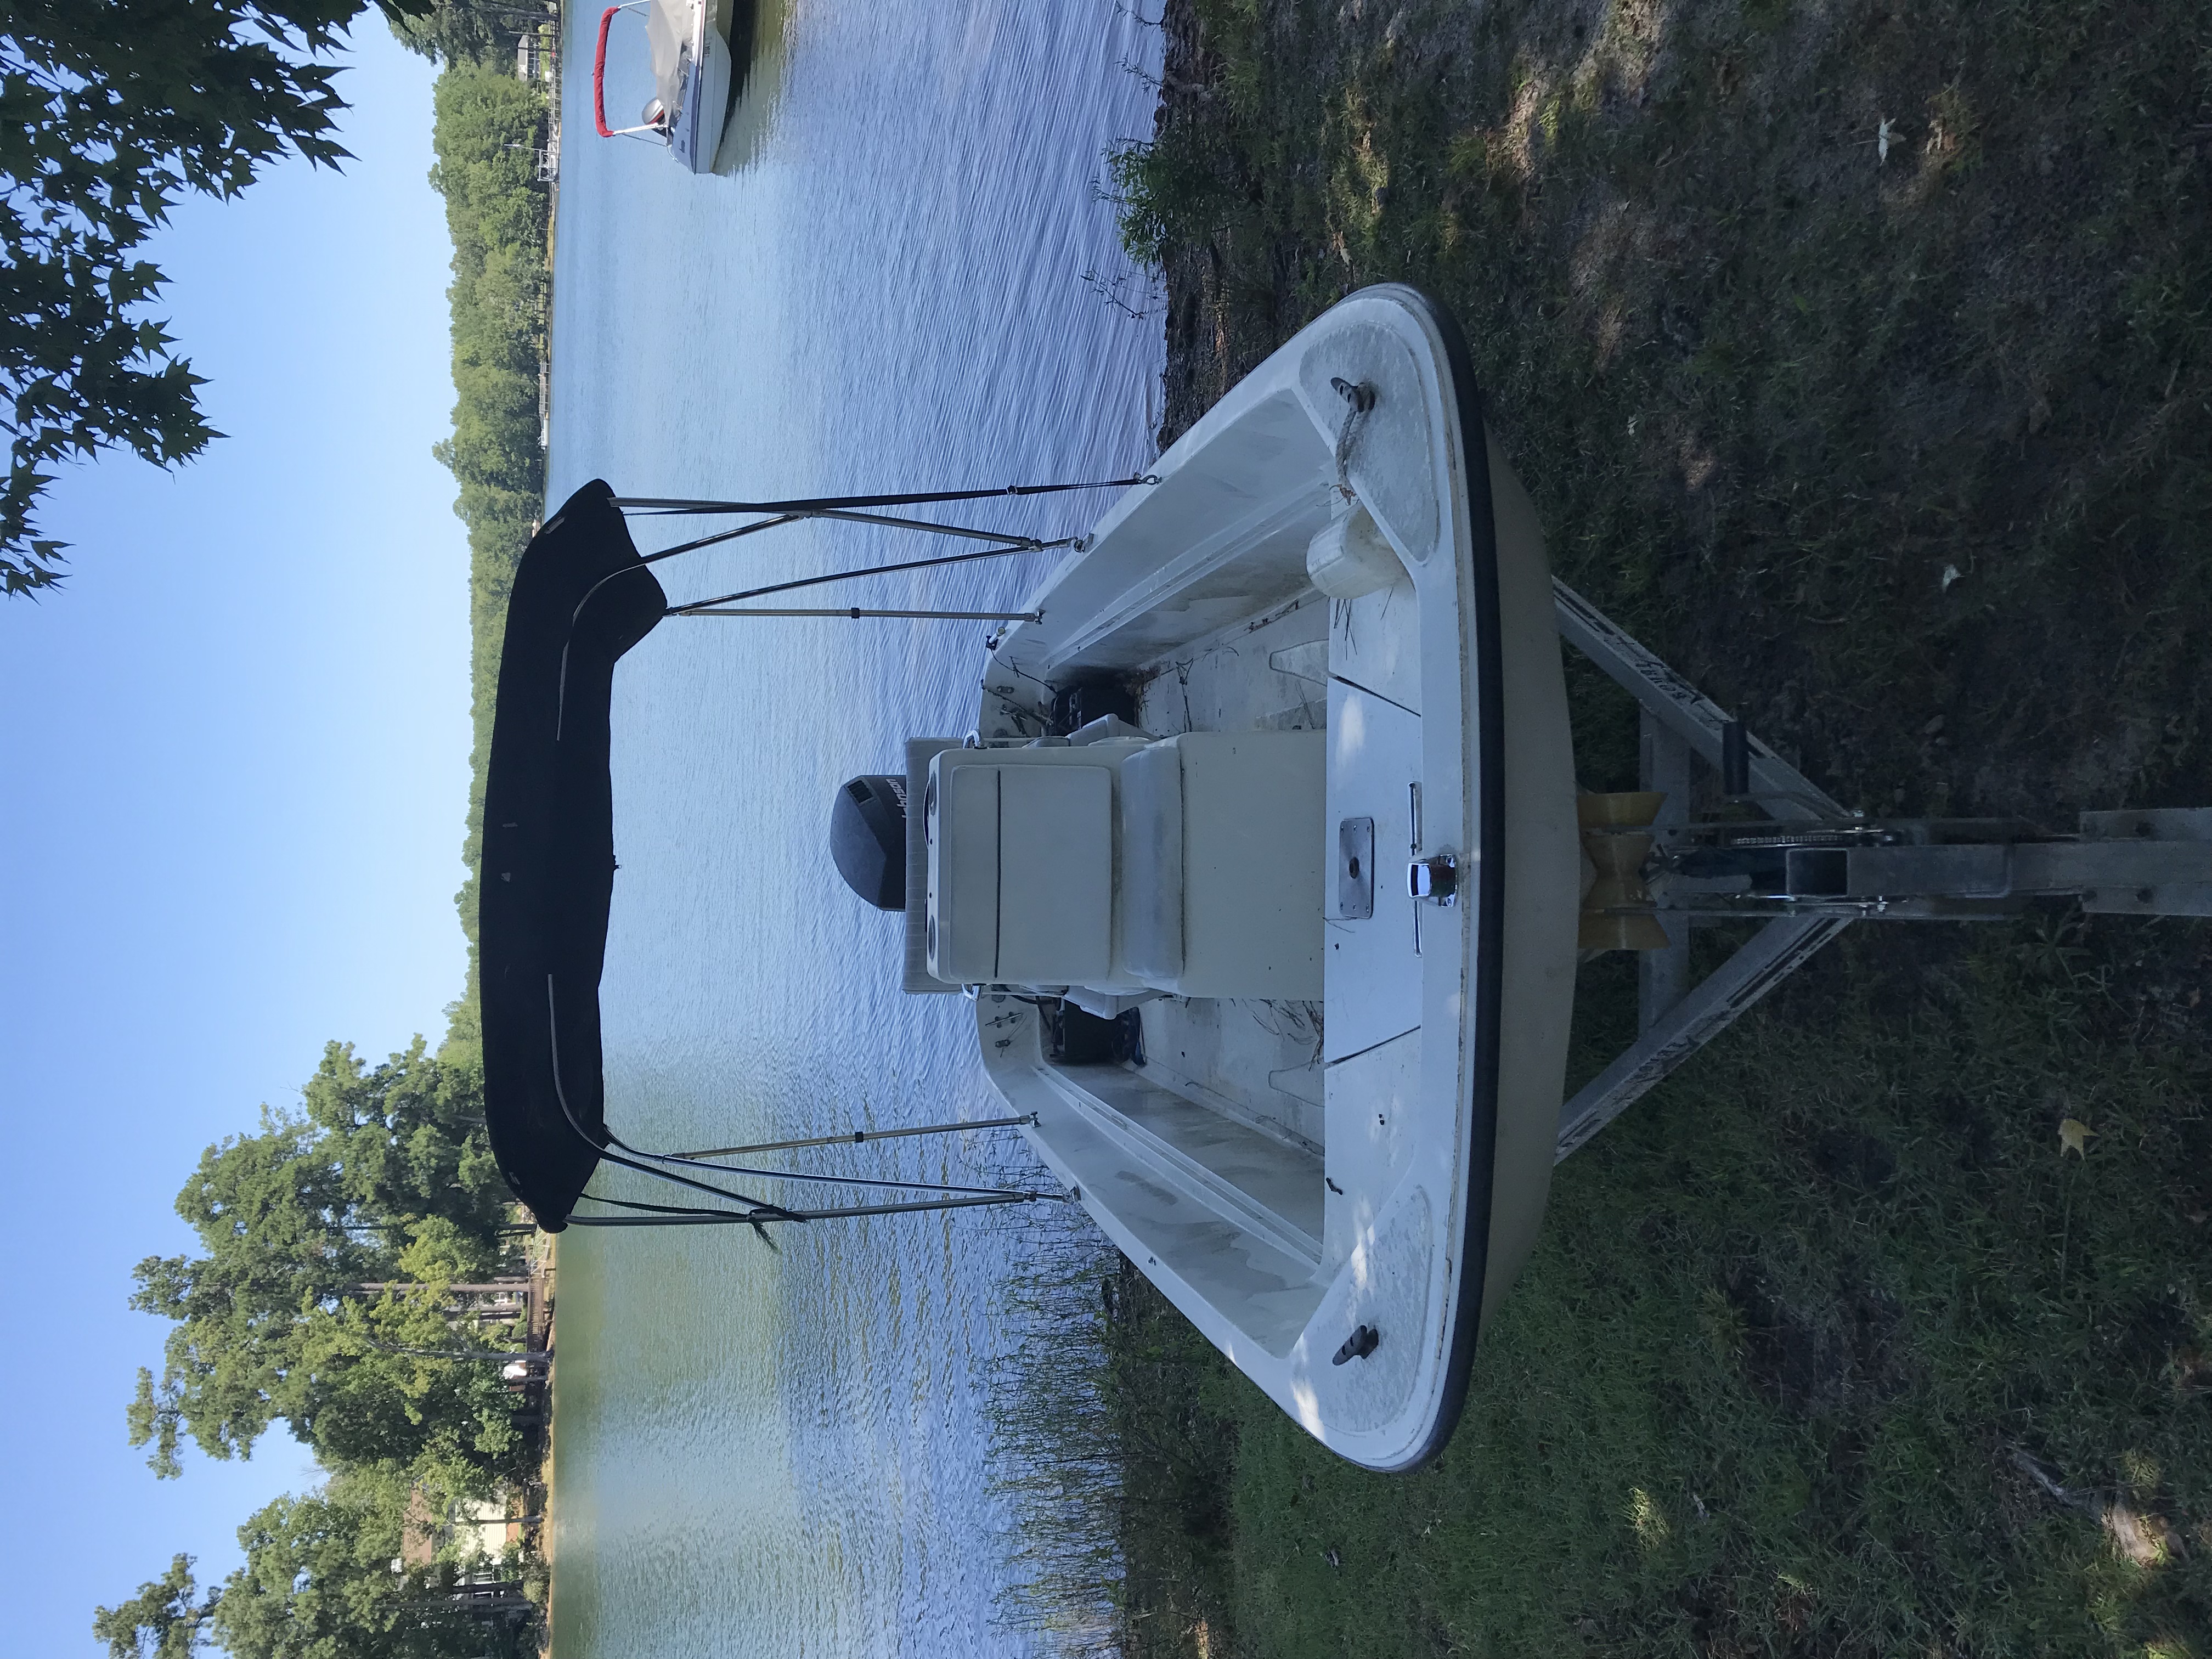 1977 17 foot Boston Whaler Newport Power boat for sale in Chapin, SC - image 7 